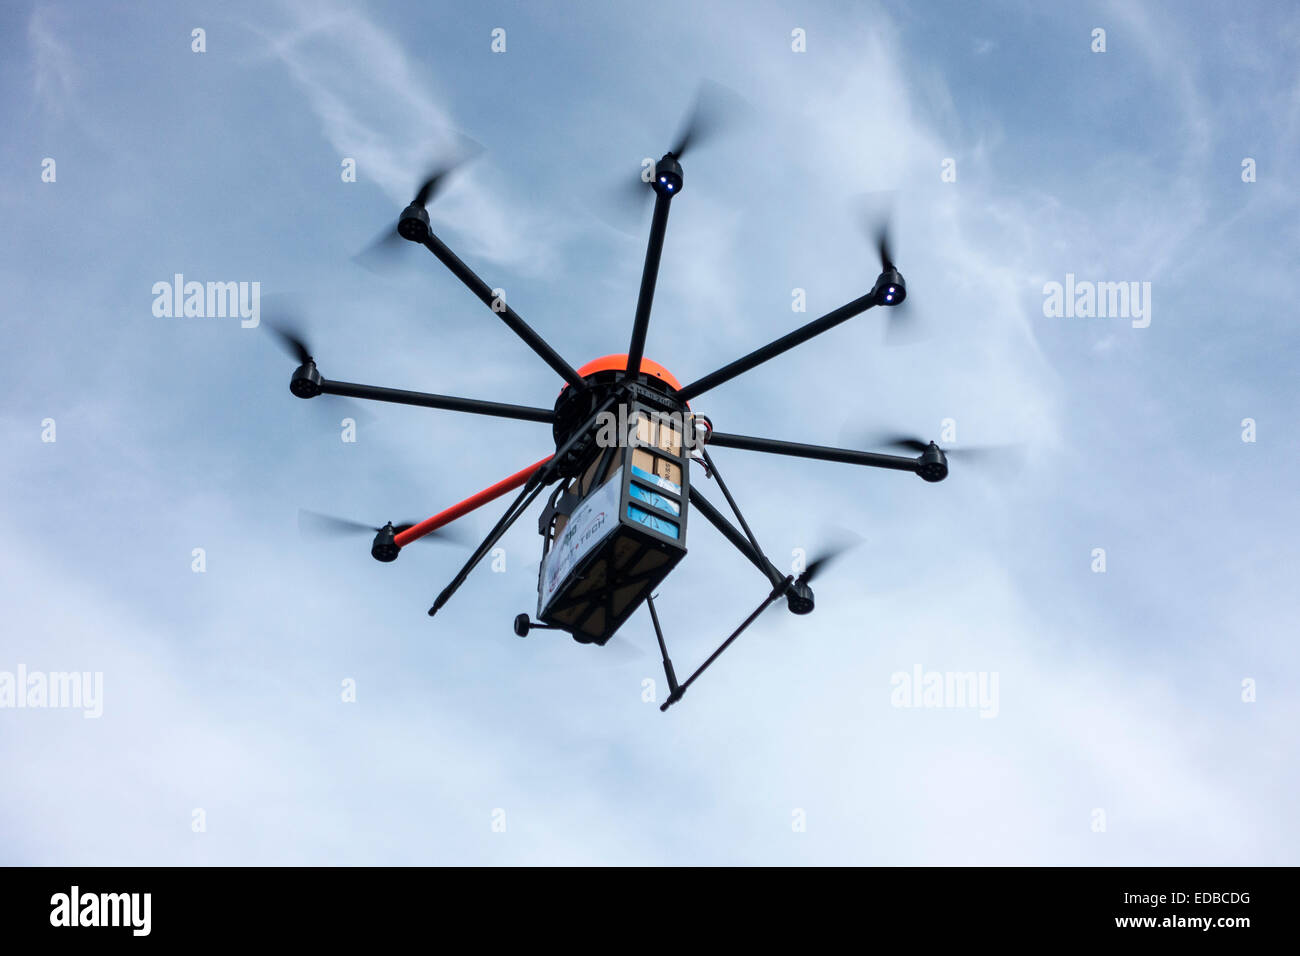 A drone carrying a package, Germany Stock Photo